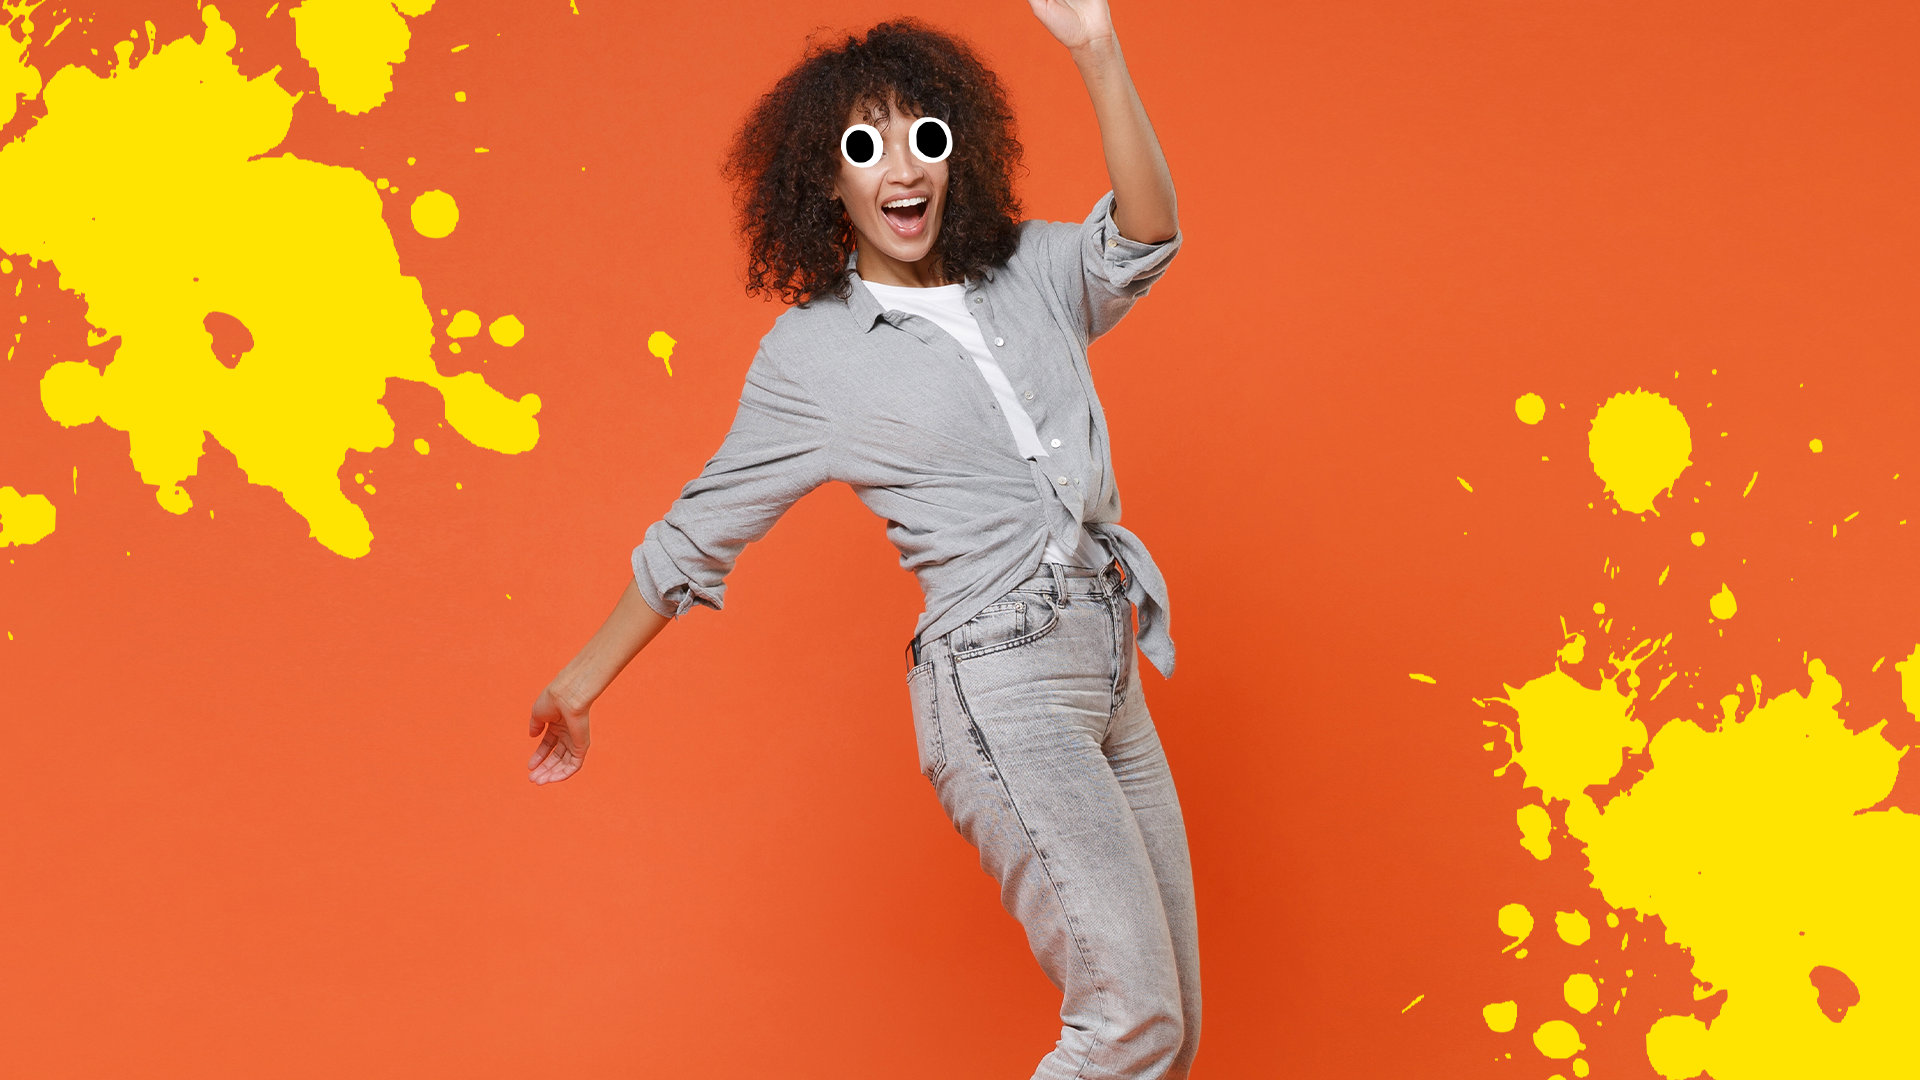 Woman dancing on orange background with yellow splats